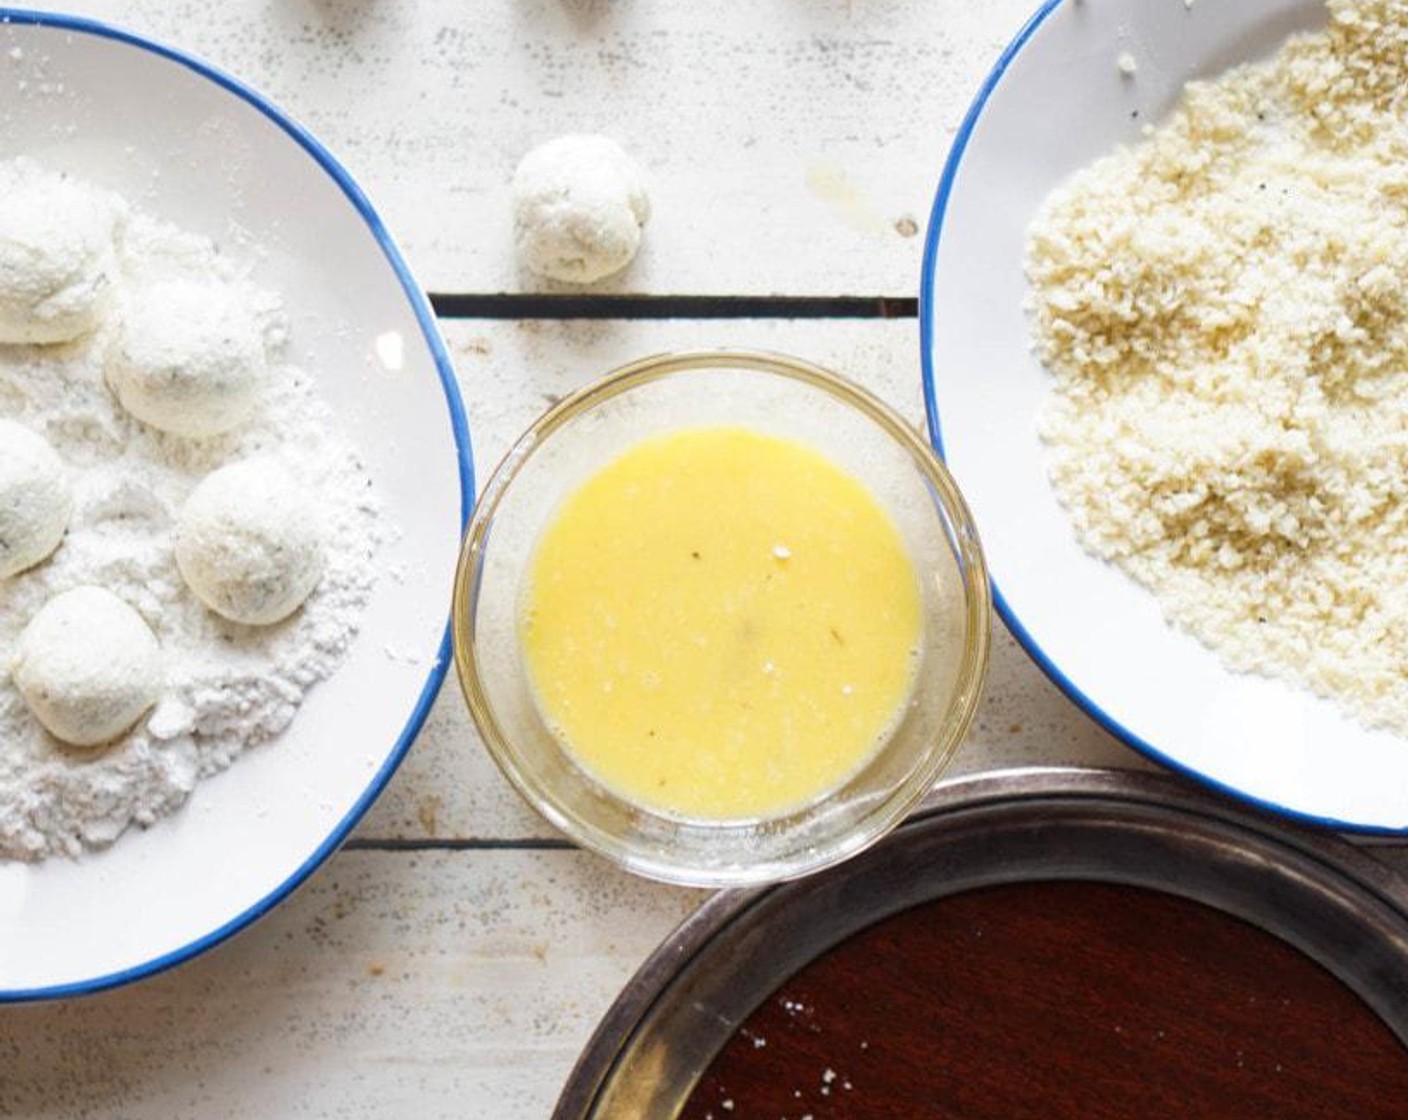 step 2 Beat the Egg (1) and a splash of water in a bowl. Add Panko Breadcrumbs (1/2 cup) to a plate and season with Salt (to taste) and Ground Black Pepper (to taste). Add All-Purpose Flour (1/2 cup) to another plate and season with salt and pepper.